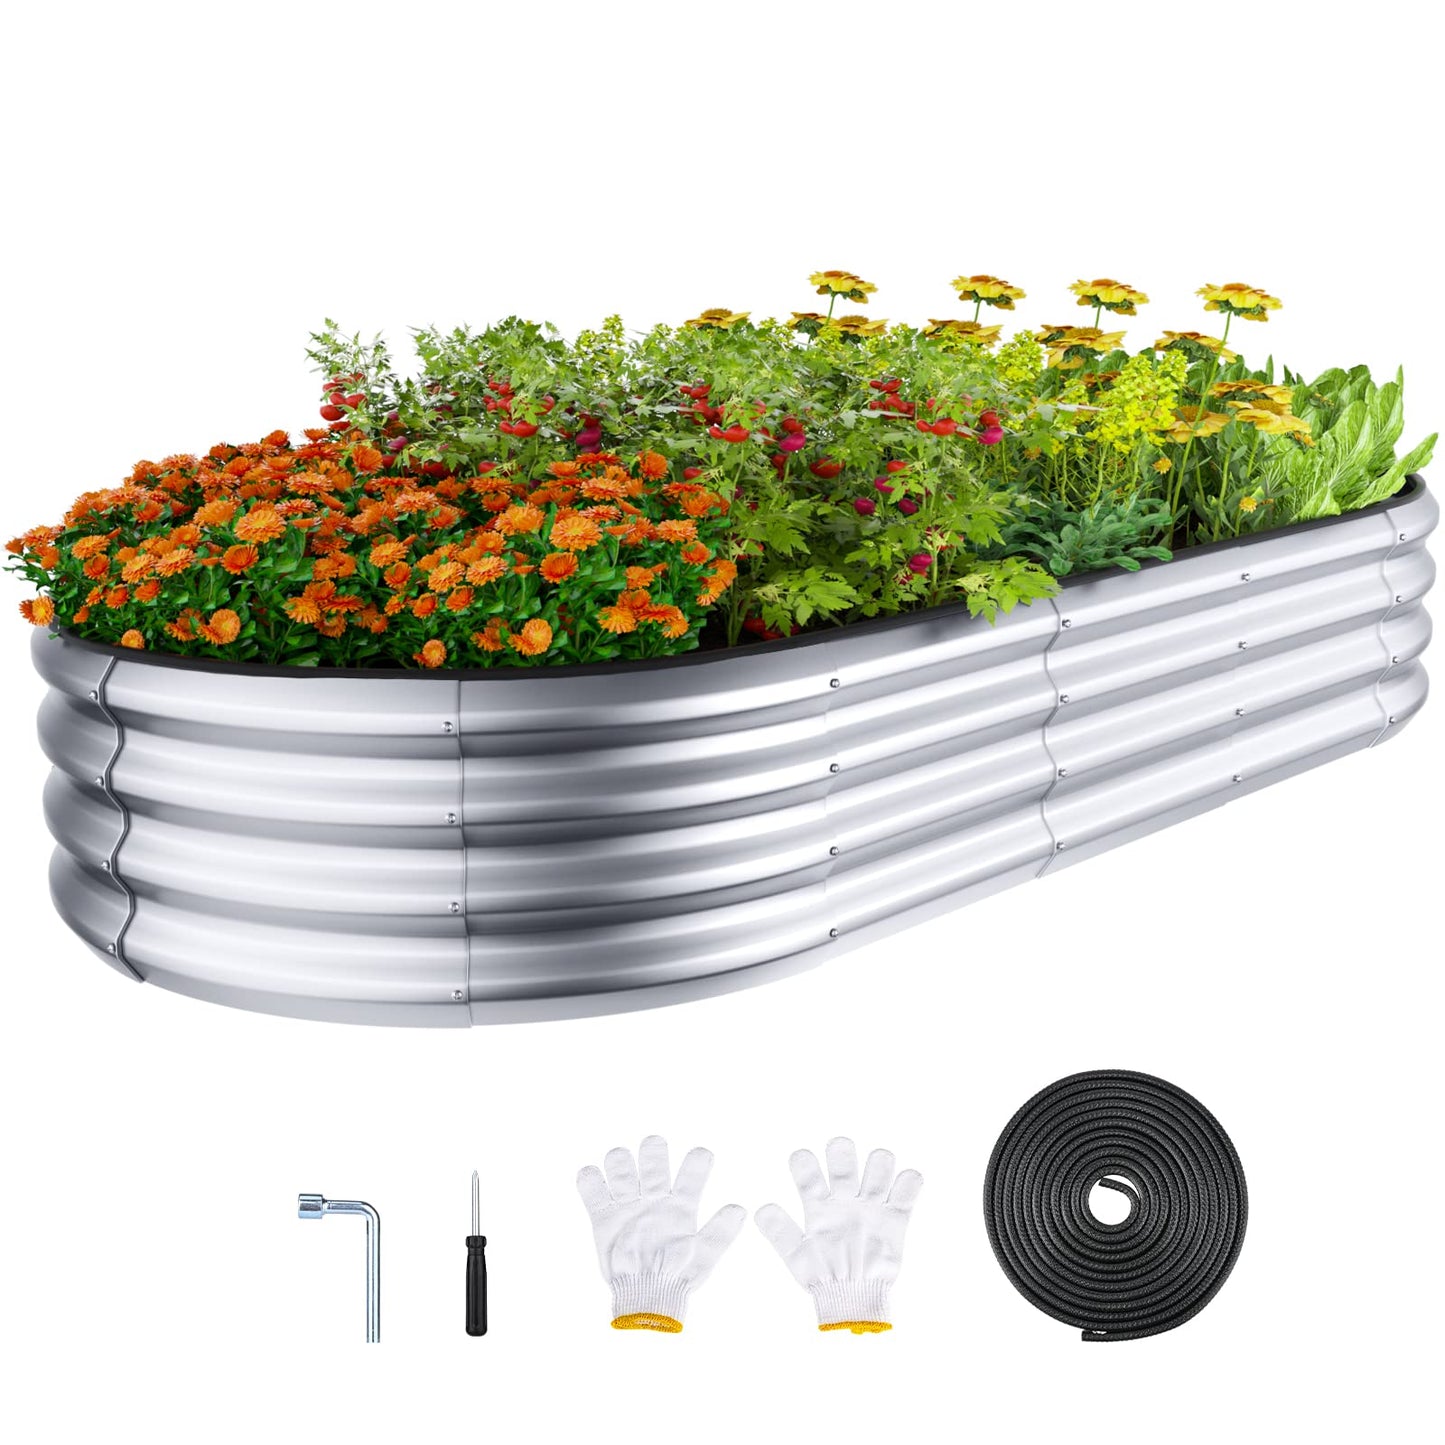 Winpull Raised Garden Bed Kit, Large Galvanized Planter Raised Garden Boxes Outdoor with Safety Edging and Gloves, Oval Metal Raised Garden Beds for Gardening (6x3x1FT)